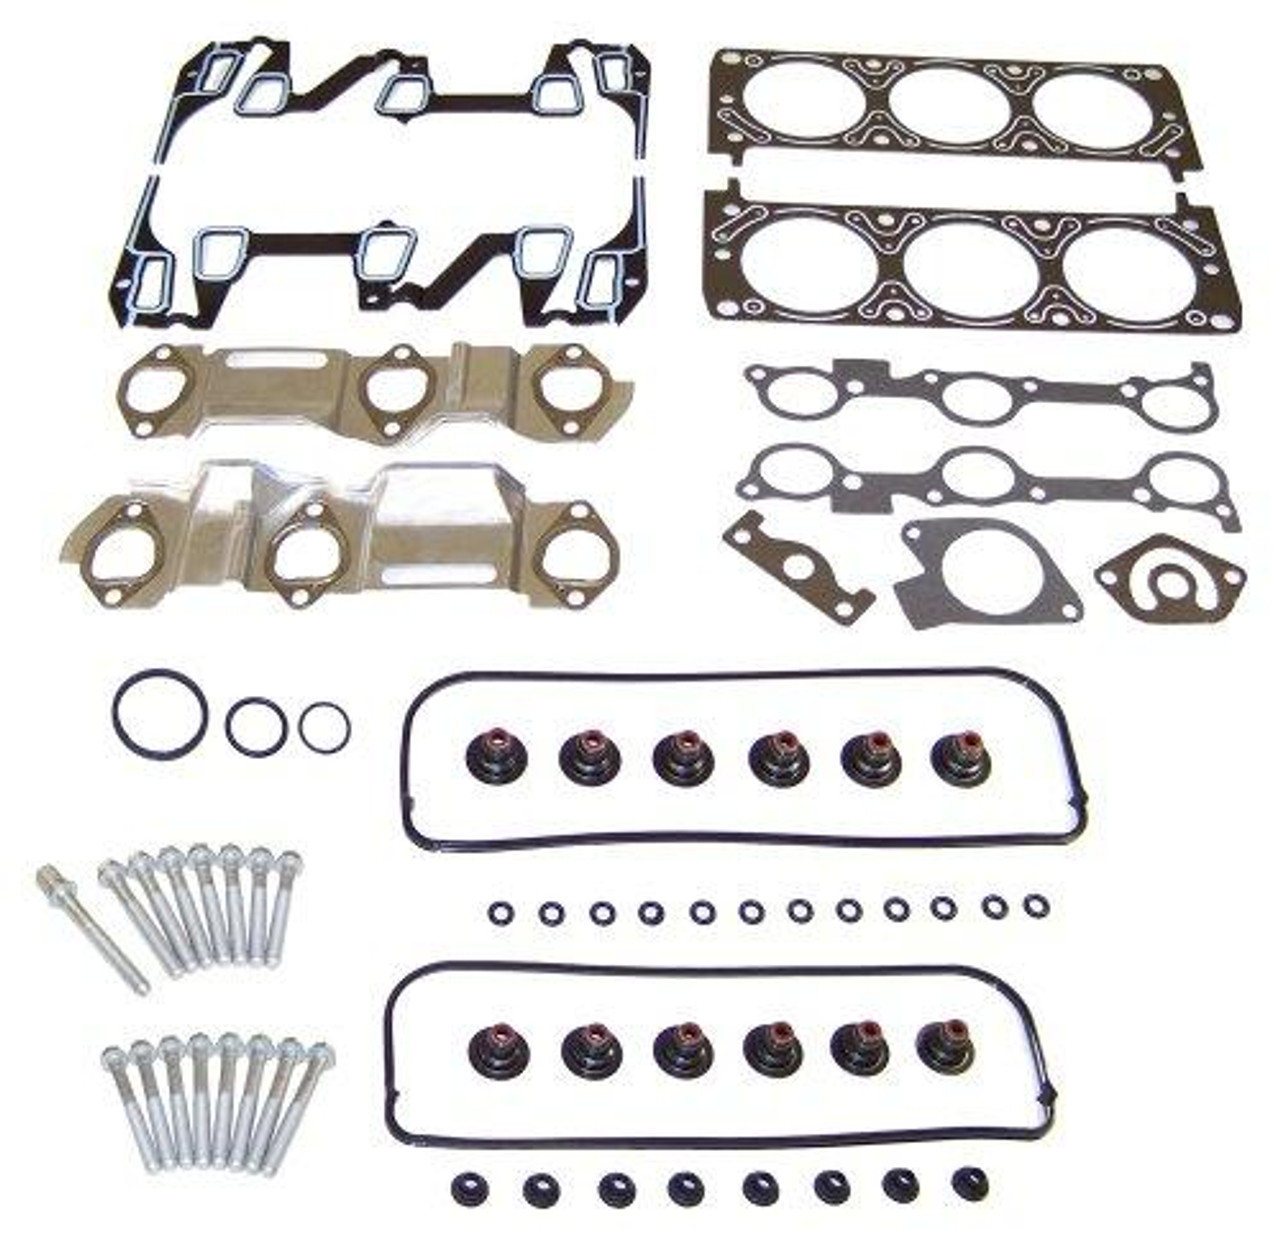 Head Gasket Set with Head Bolt Kit - 1994 Buick Century 3.1L Engine Parts # HGB3146ZE1